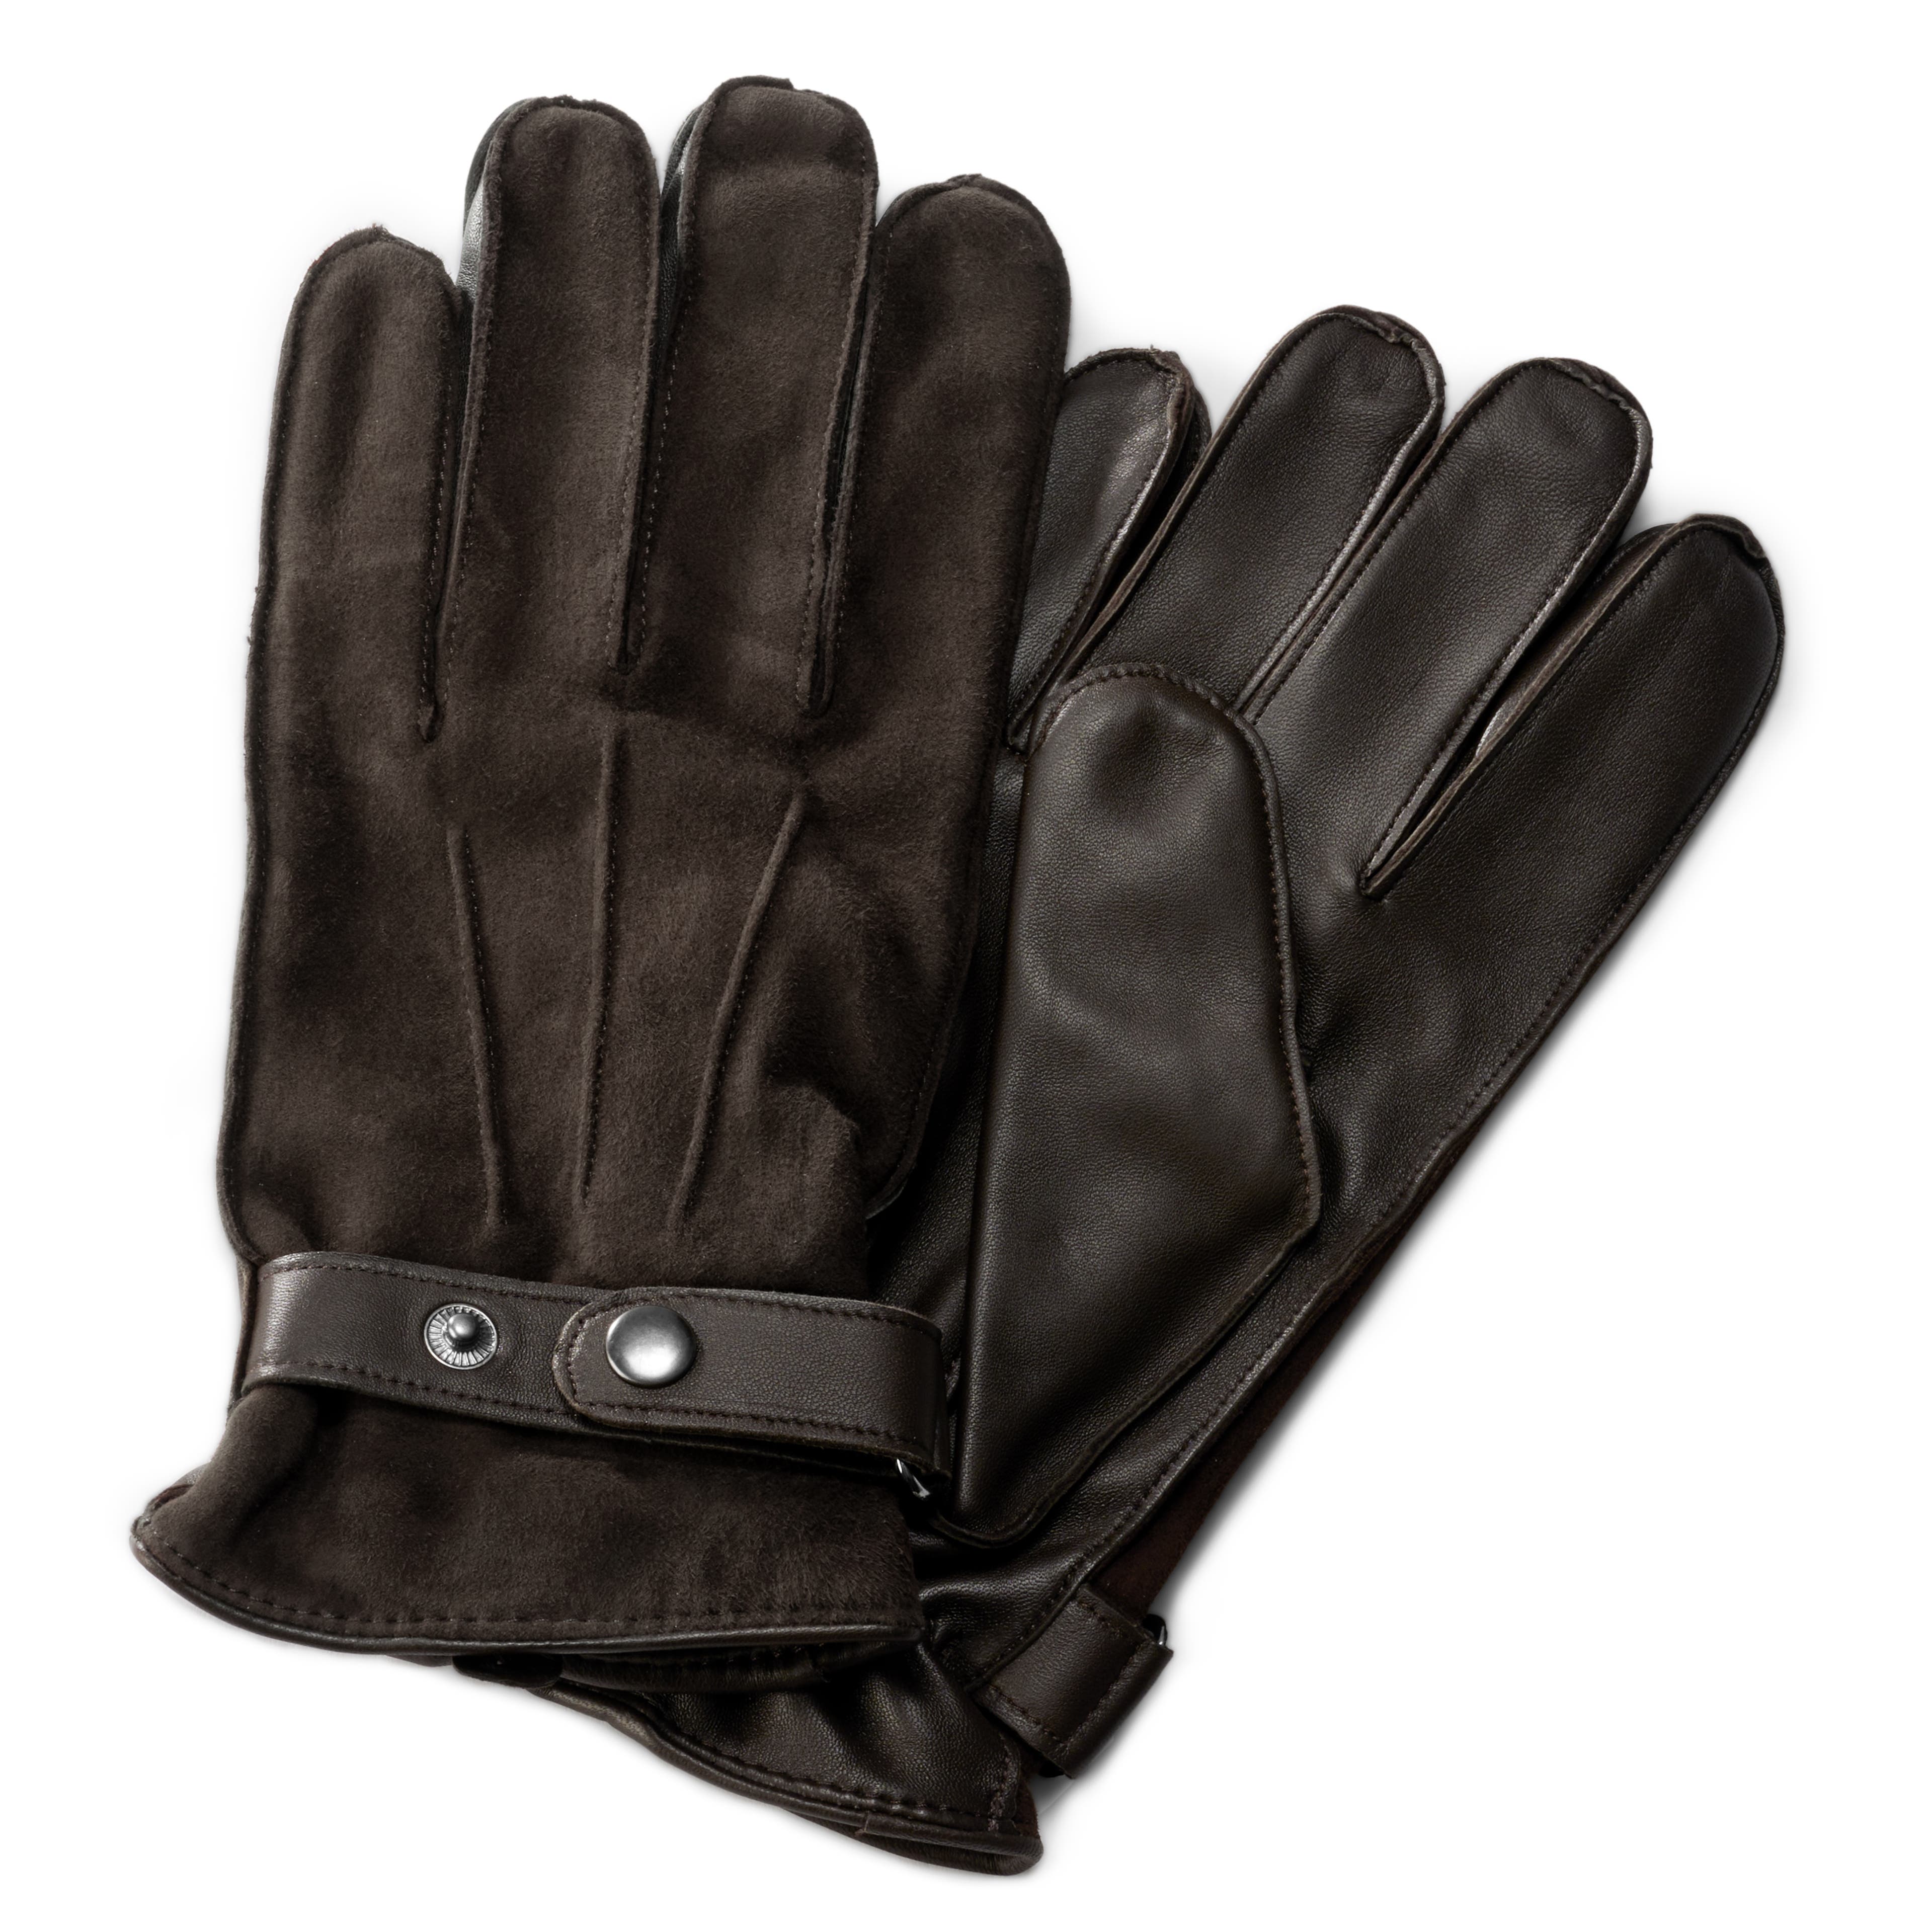 KNOXVILLE GLOVE CO. Barbed Tape Wire Handlers Gloves - Linemen -  Leather/Suede